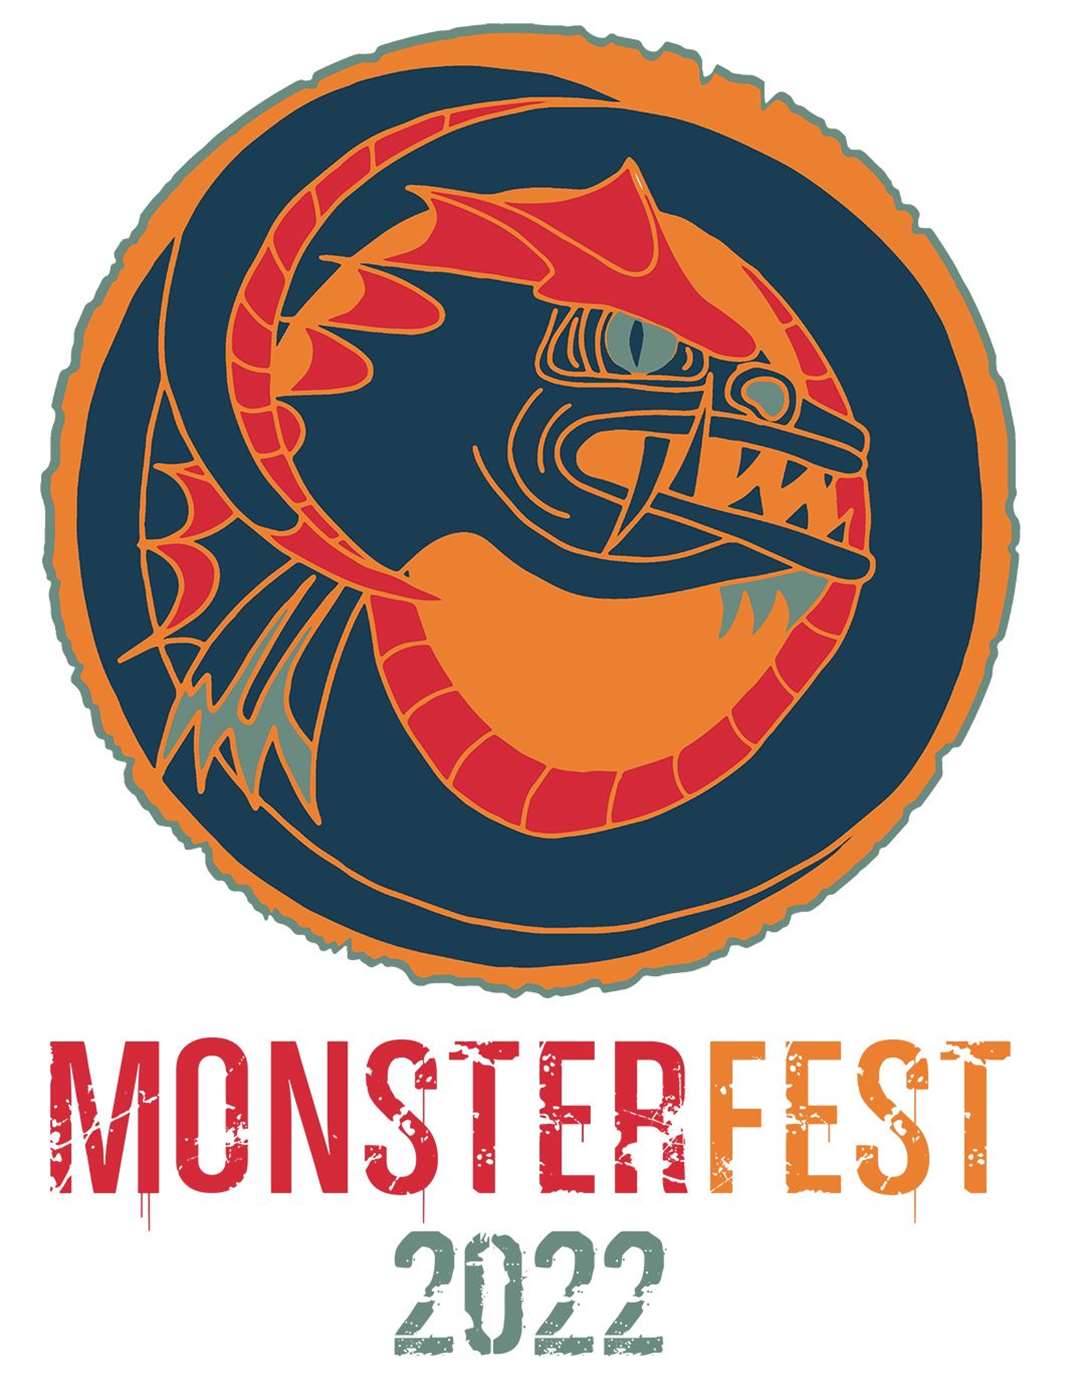 This year's Monsterfest logo.